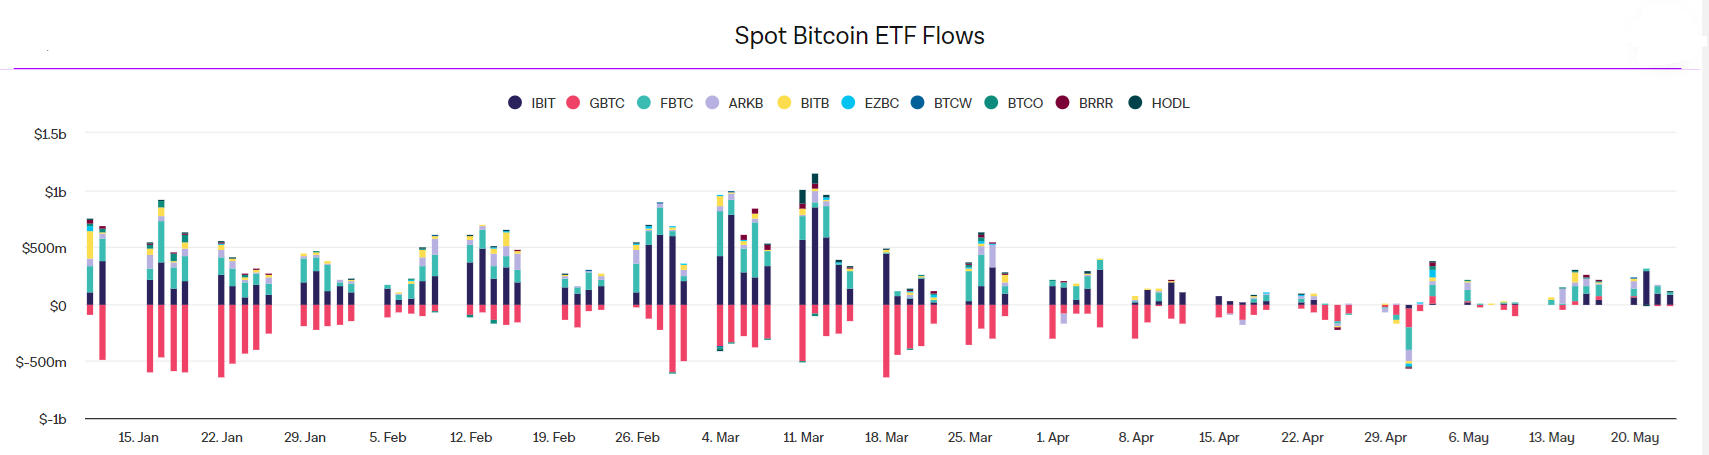 Market research report: Bitcoin sees modest gains, ETH surges on ETF approval, US stocks hit ATHs - ETF FLOWS 1